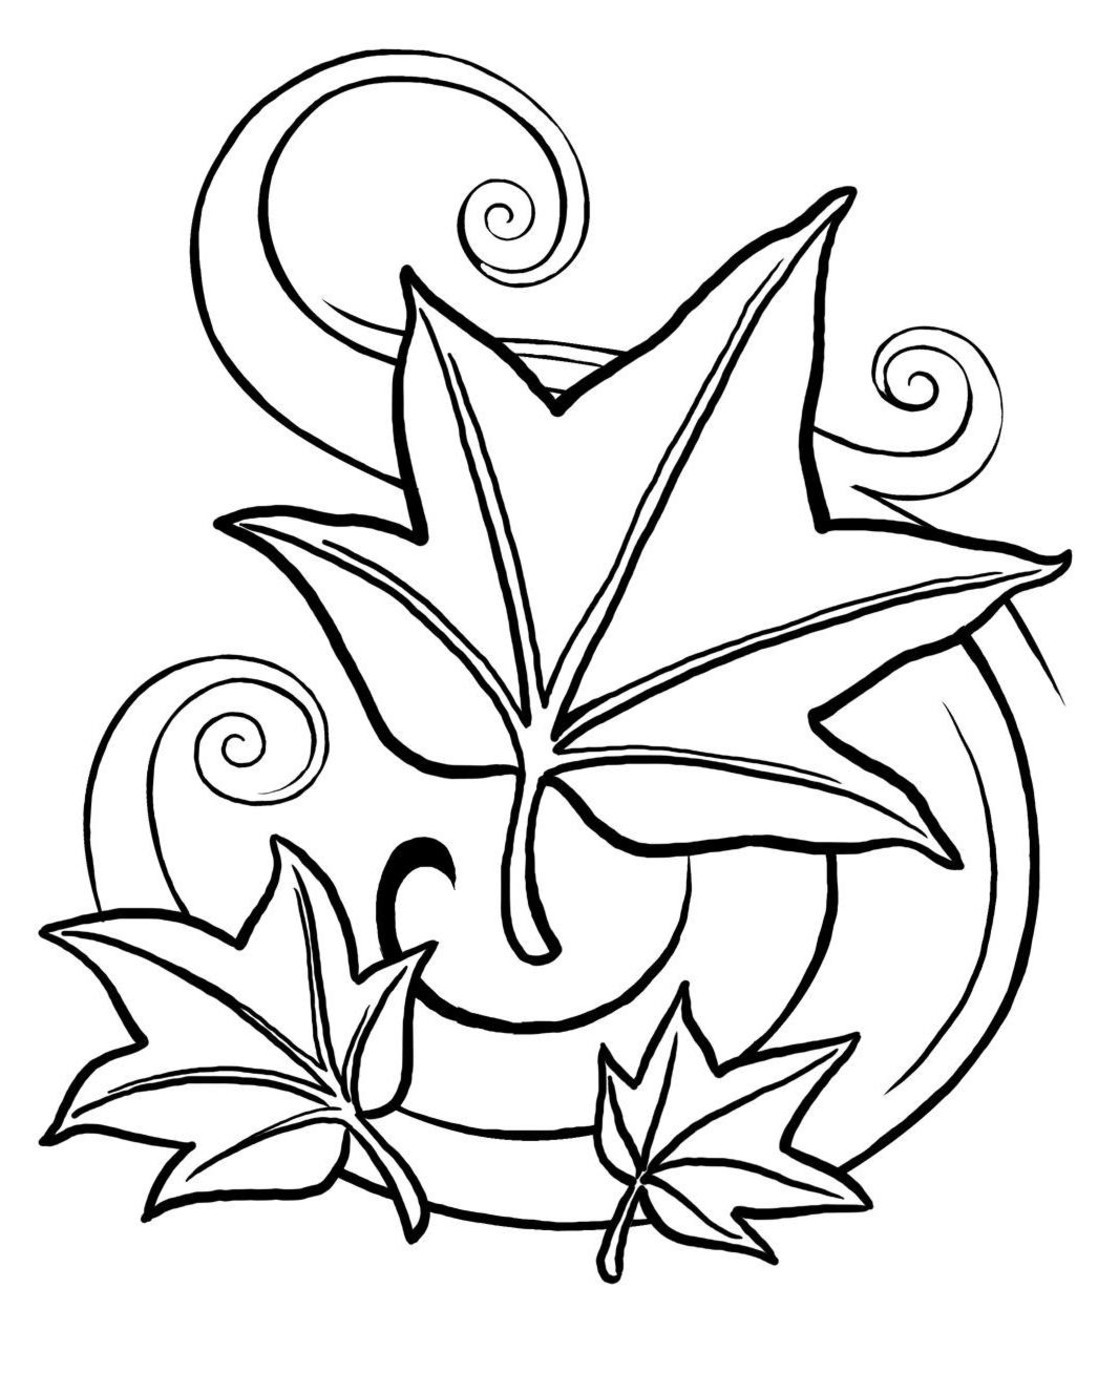 Autumn Leaves Coloring Pages
 Fall Apples Coloring Pages